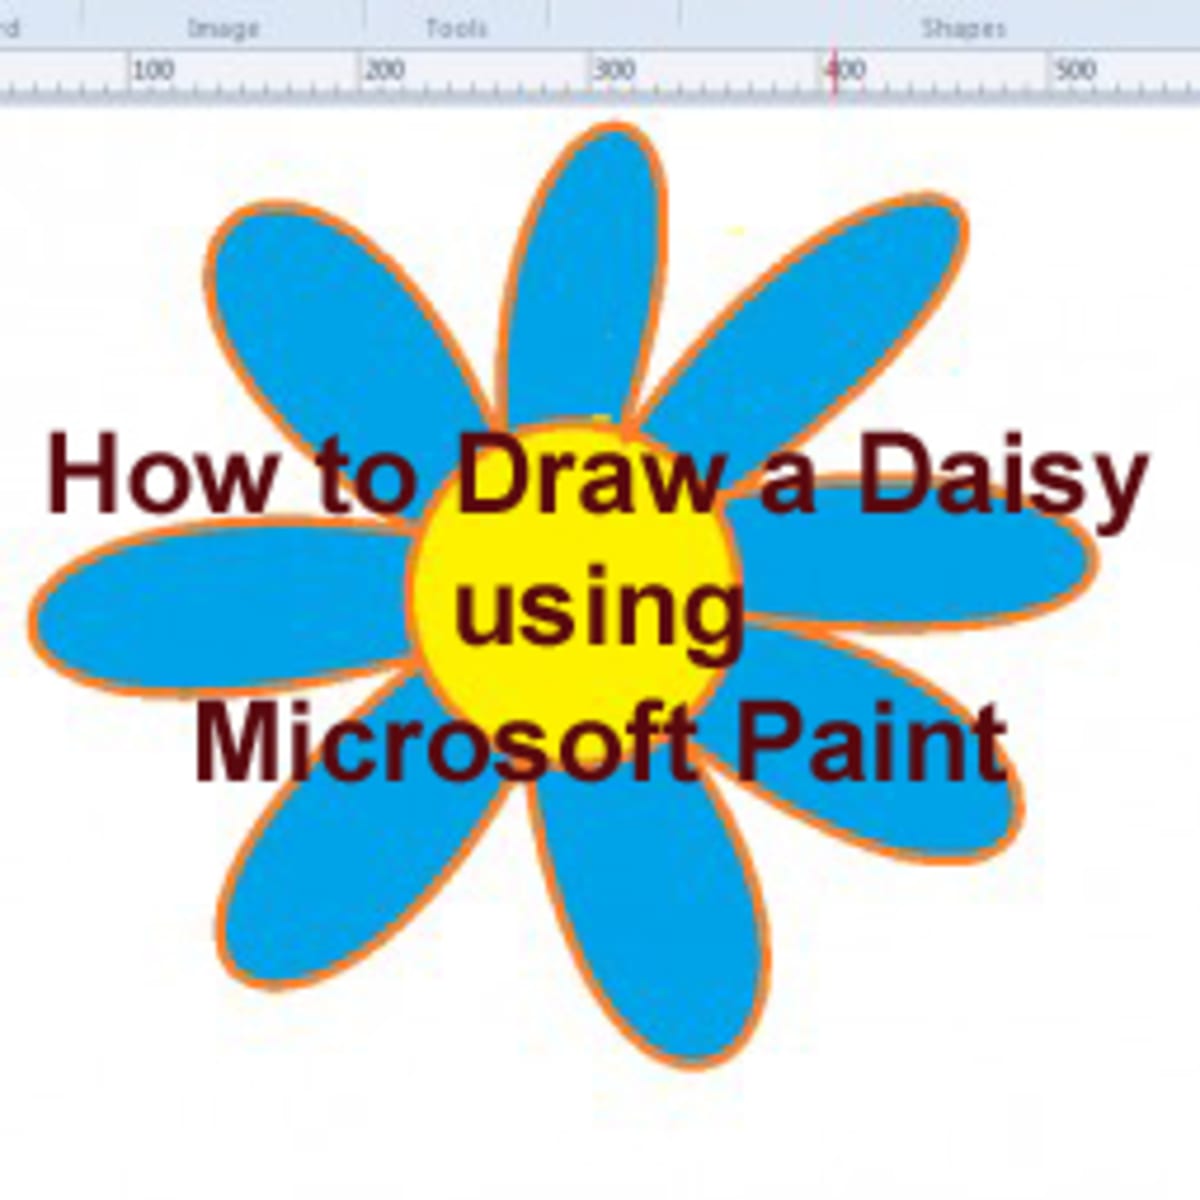 Microsoft Paint Tips & Tricks for Windows Users